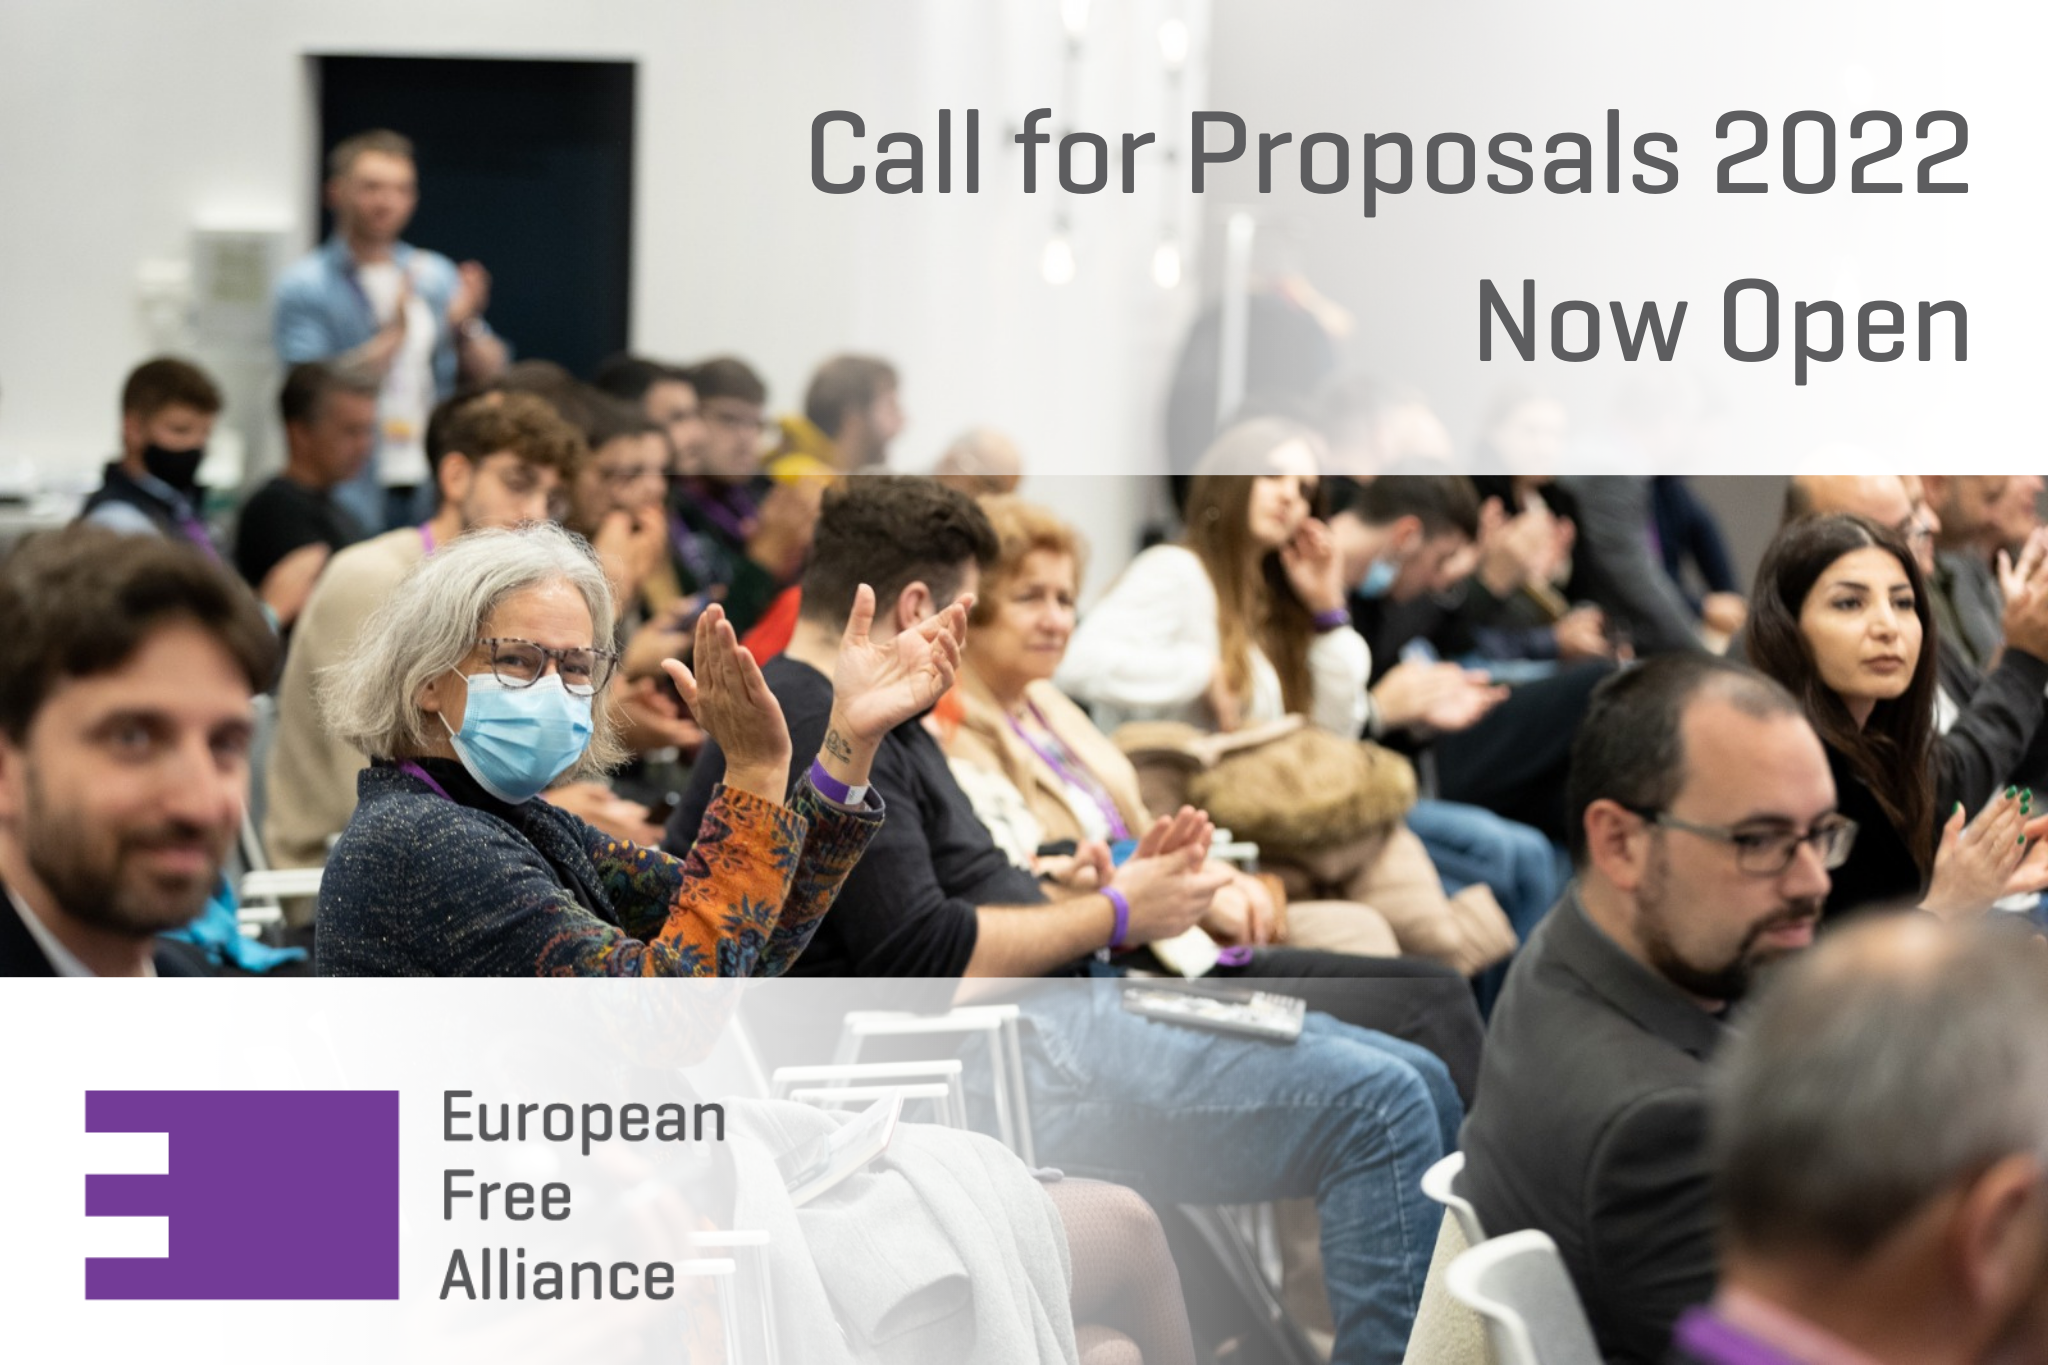 Call for Proposals 2022: Now Open